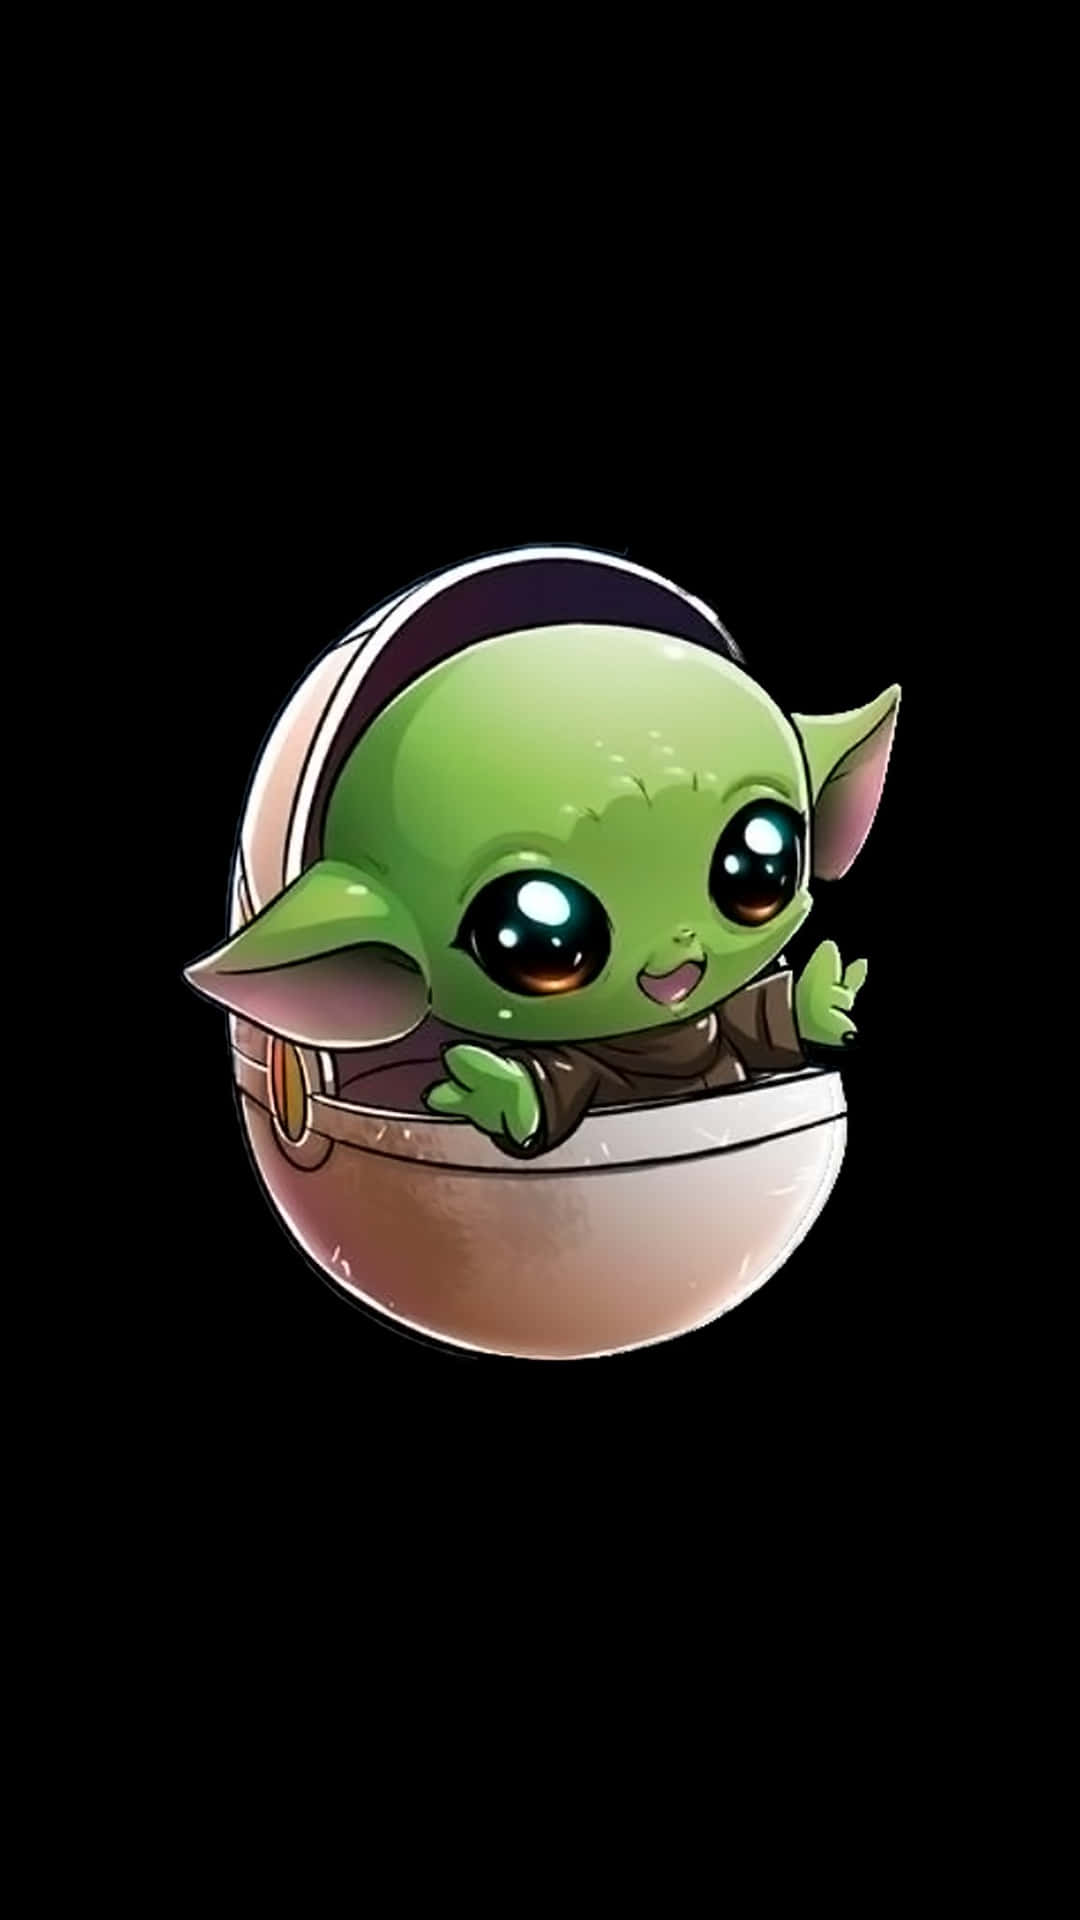 The Cutest Baby Yoda Ever!